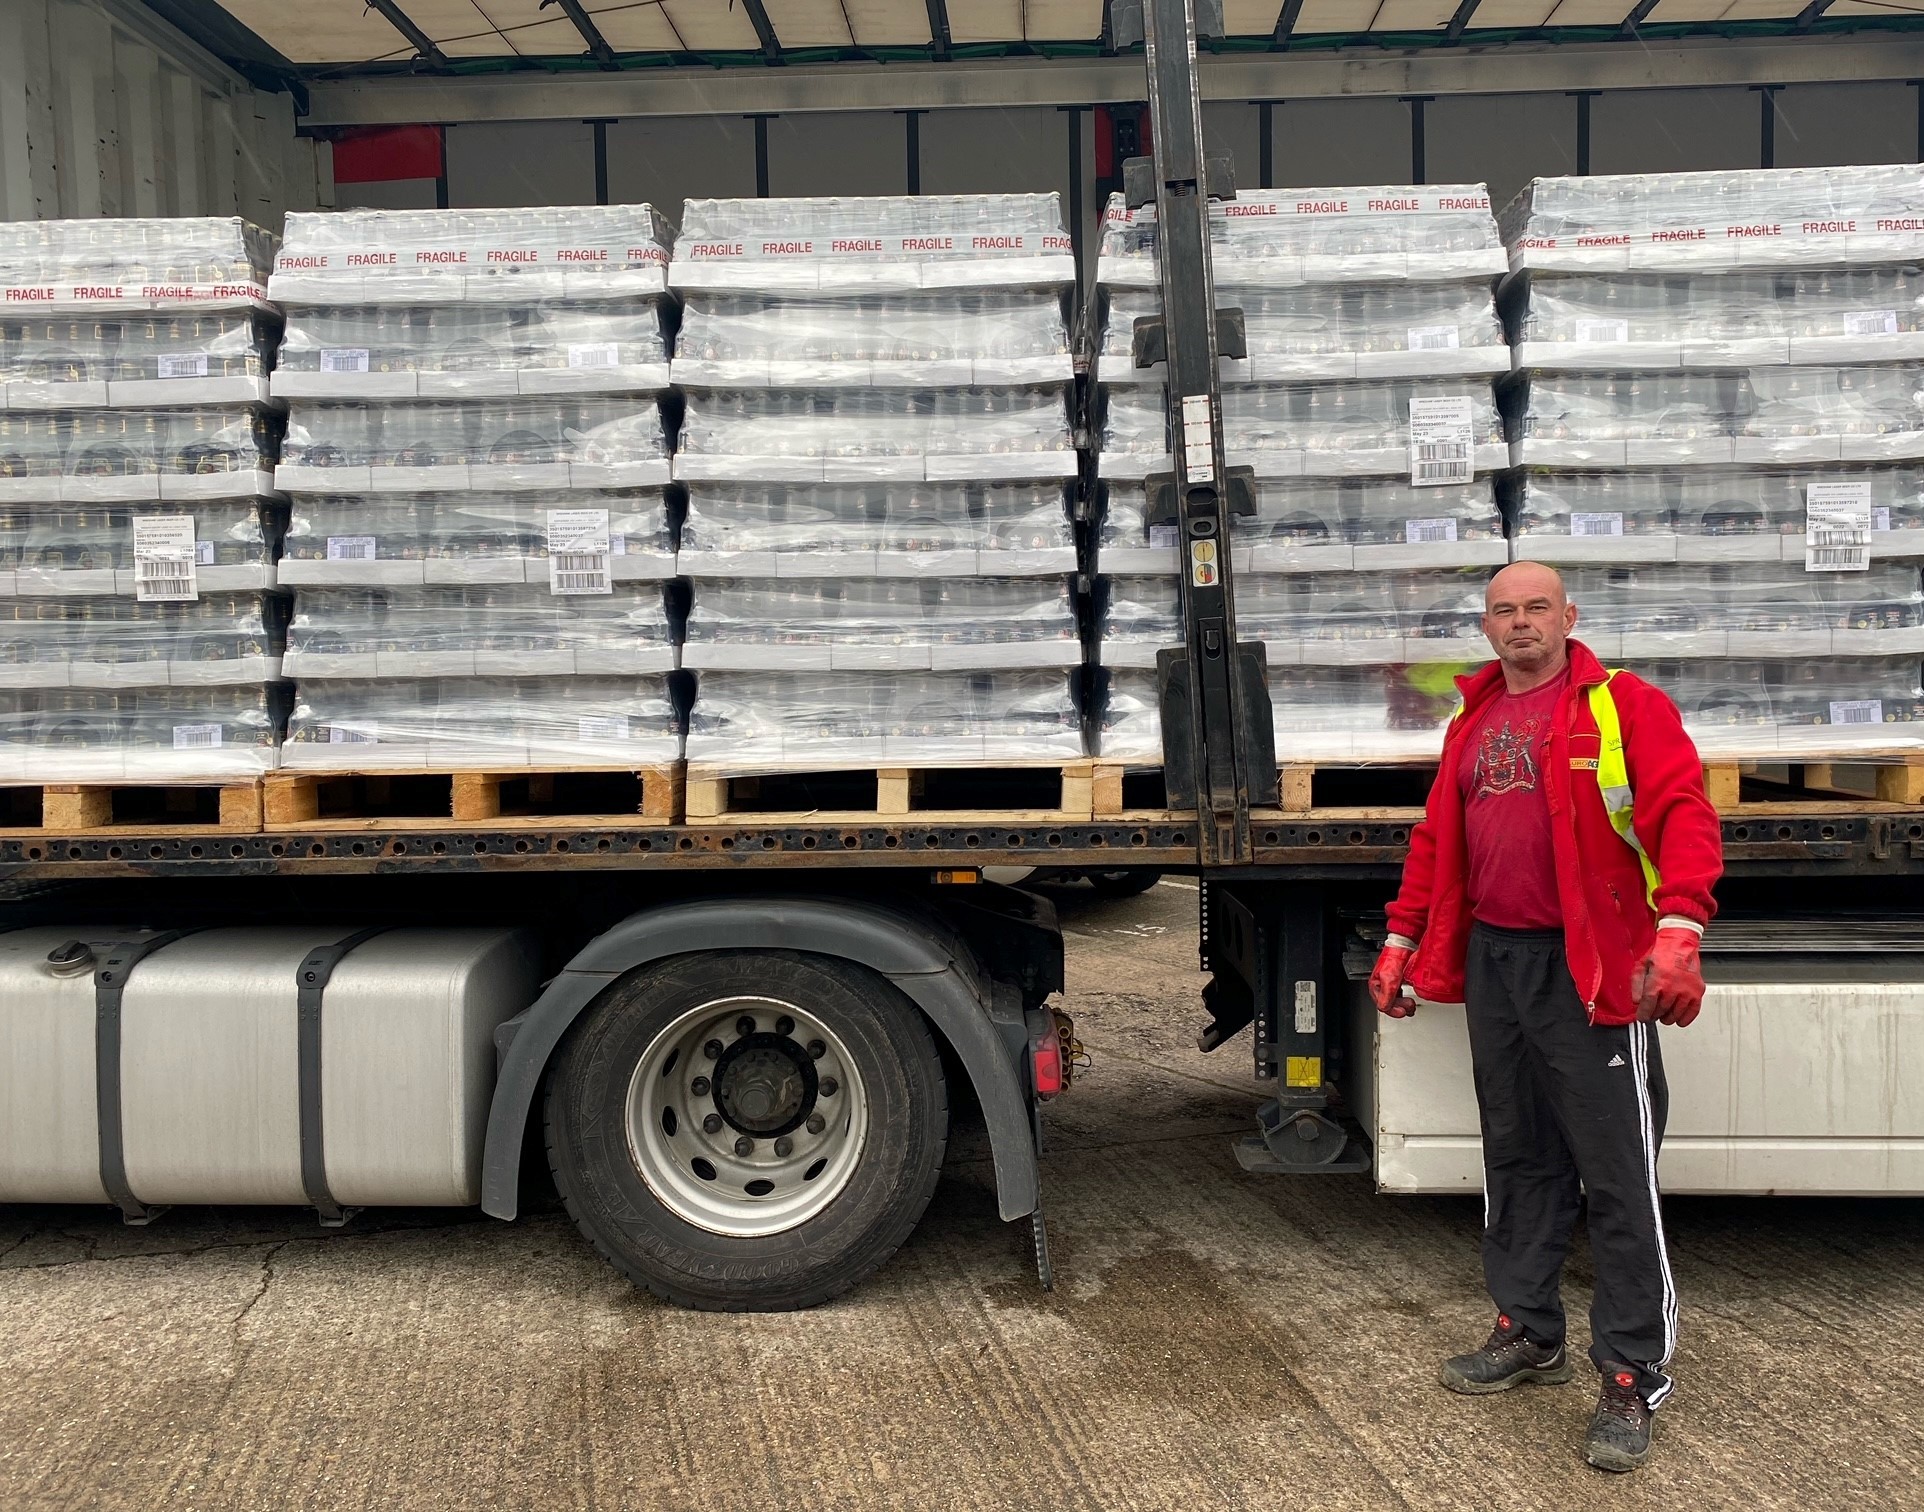 18,000 bottles of Wrexham Lager were picked up today and are now bound for Pozna? in western Poland.